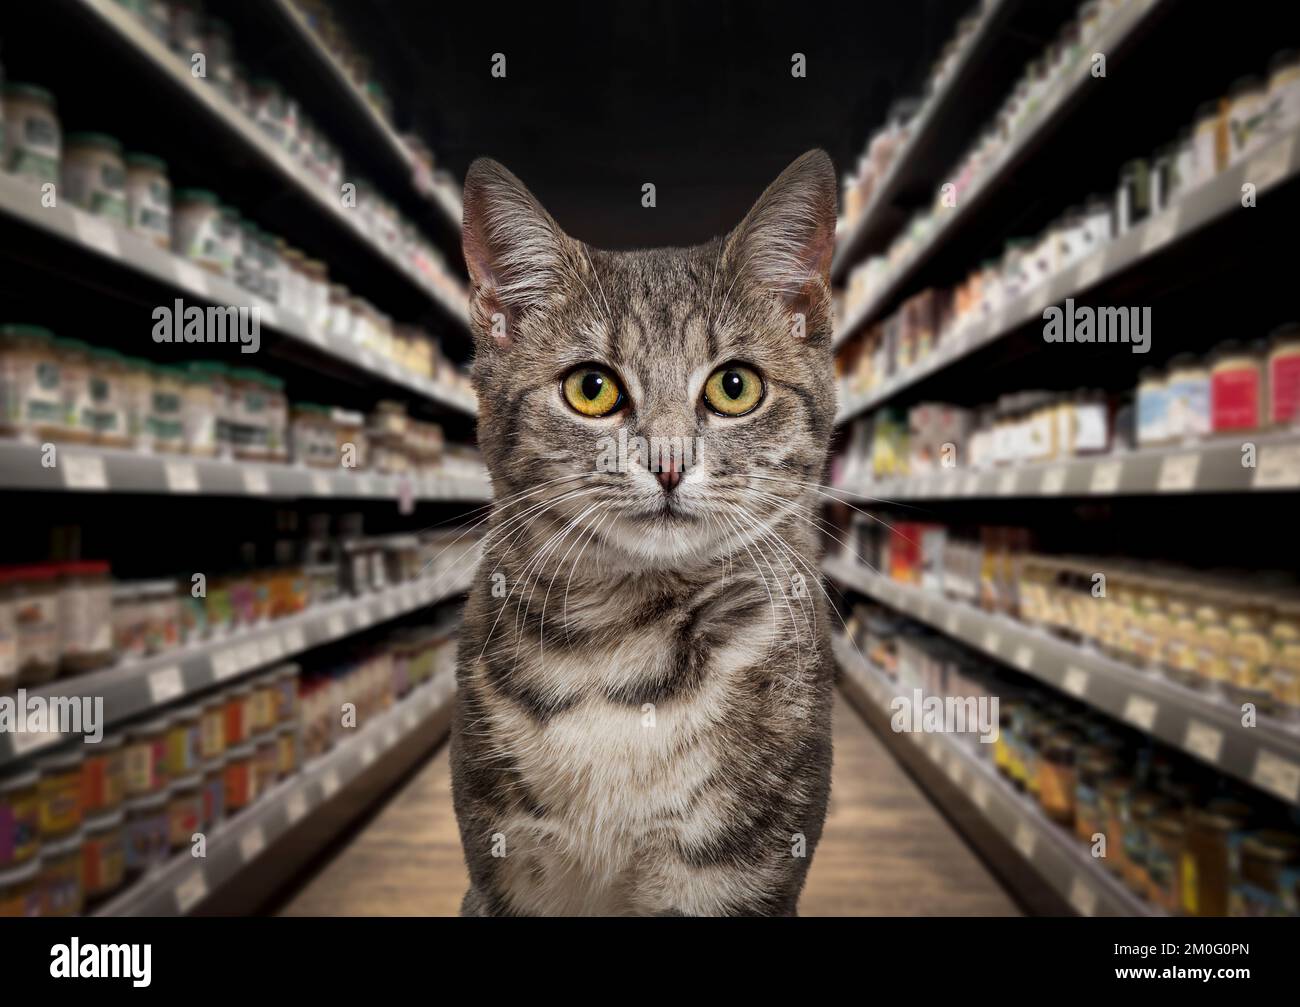 Cat looking at the camera in front of and in the middle of a food shelf in a pet supermarket. The background is blurred and dark. Stock Photo